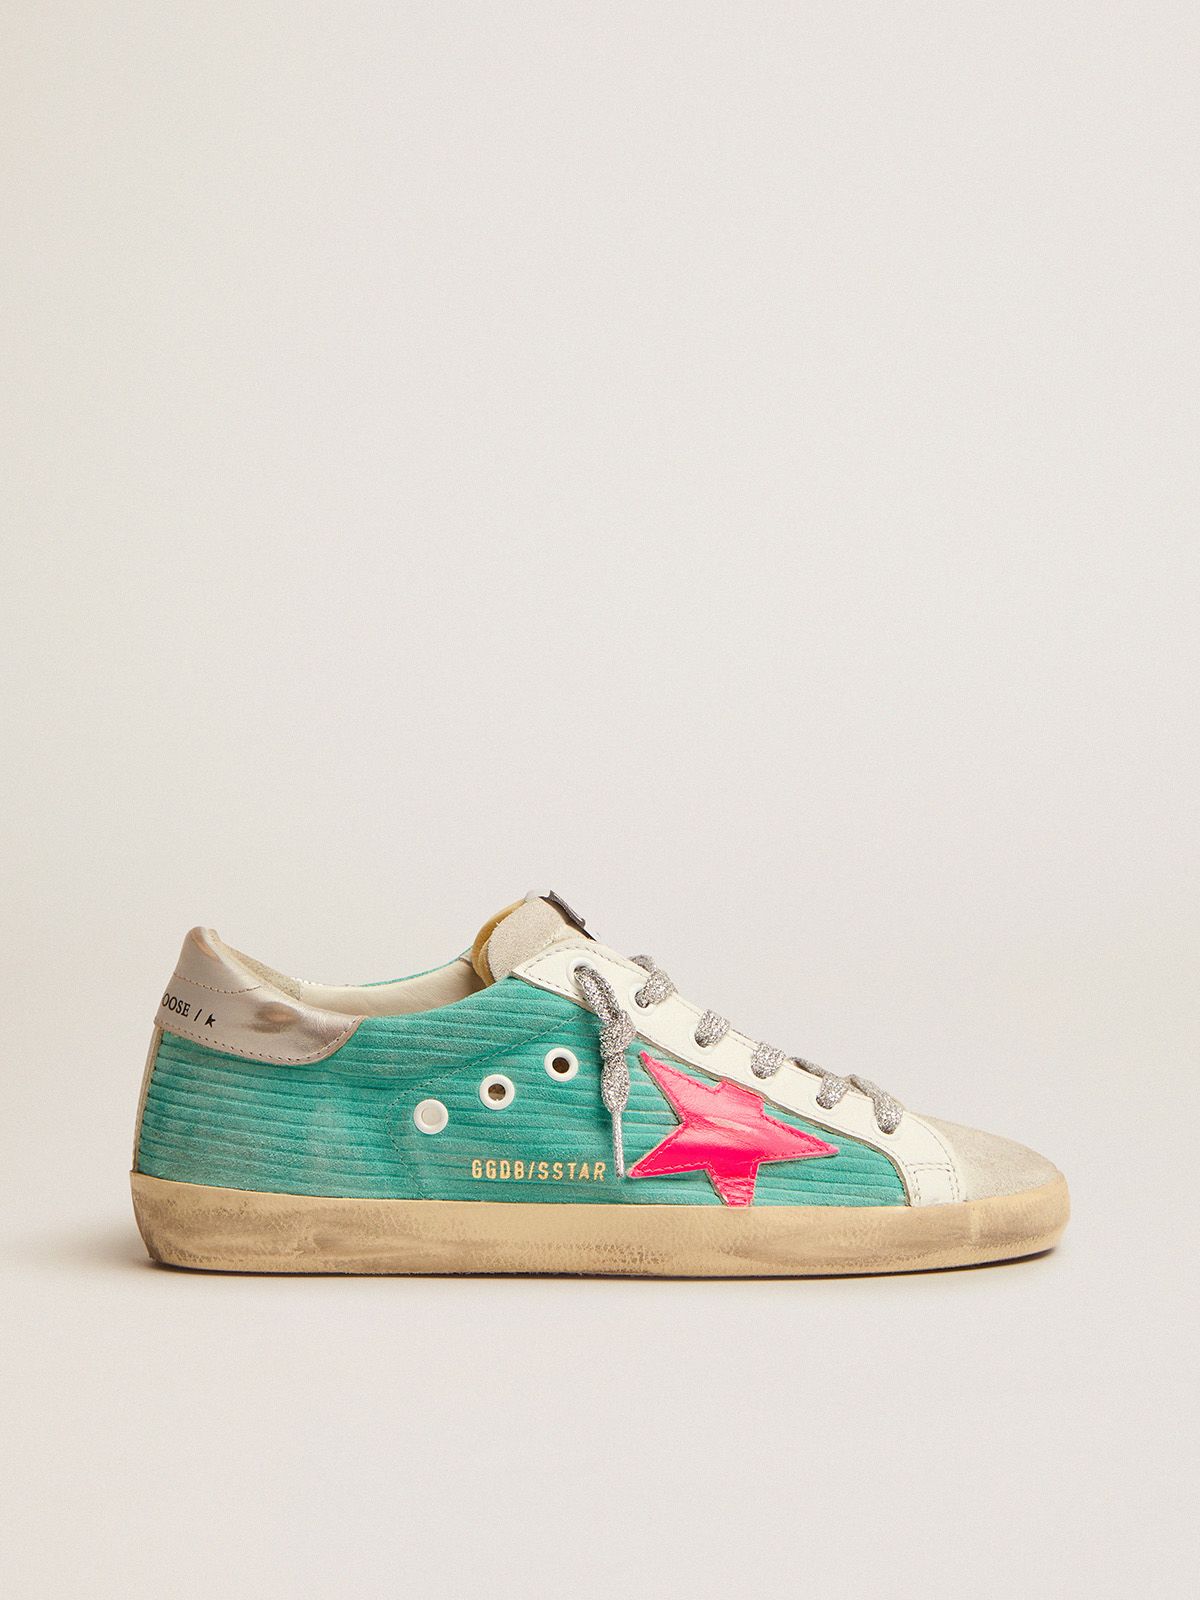 Super-Star sneakers in turquoise suede with corduroy print and fluorescent pink leather star